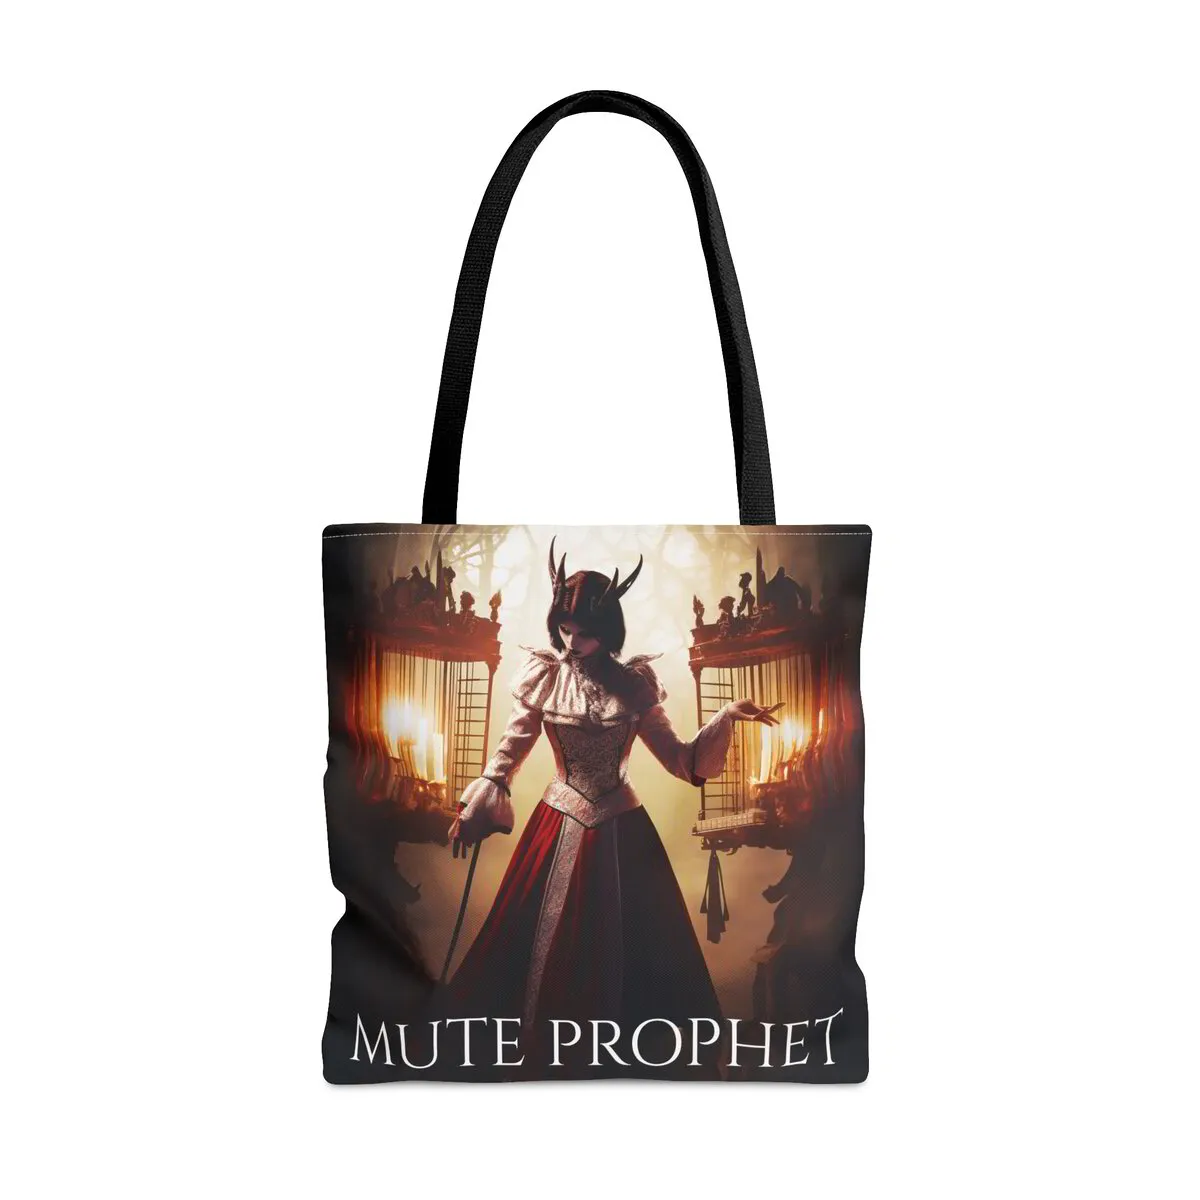 "The Candle Warden" Tote Bag